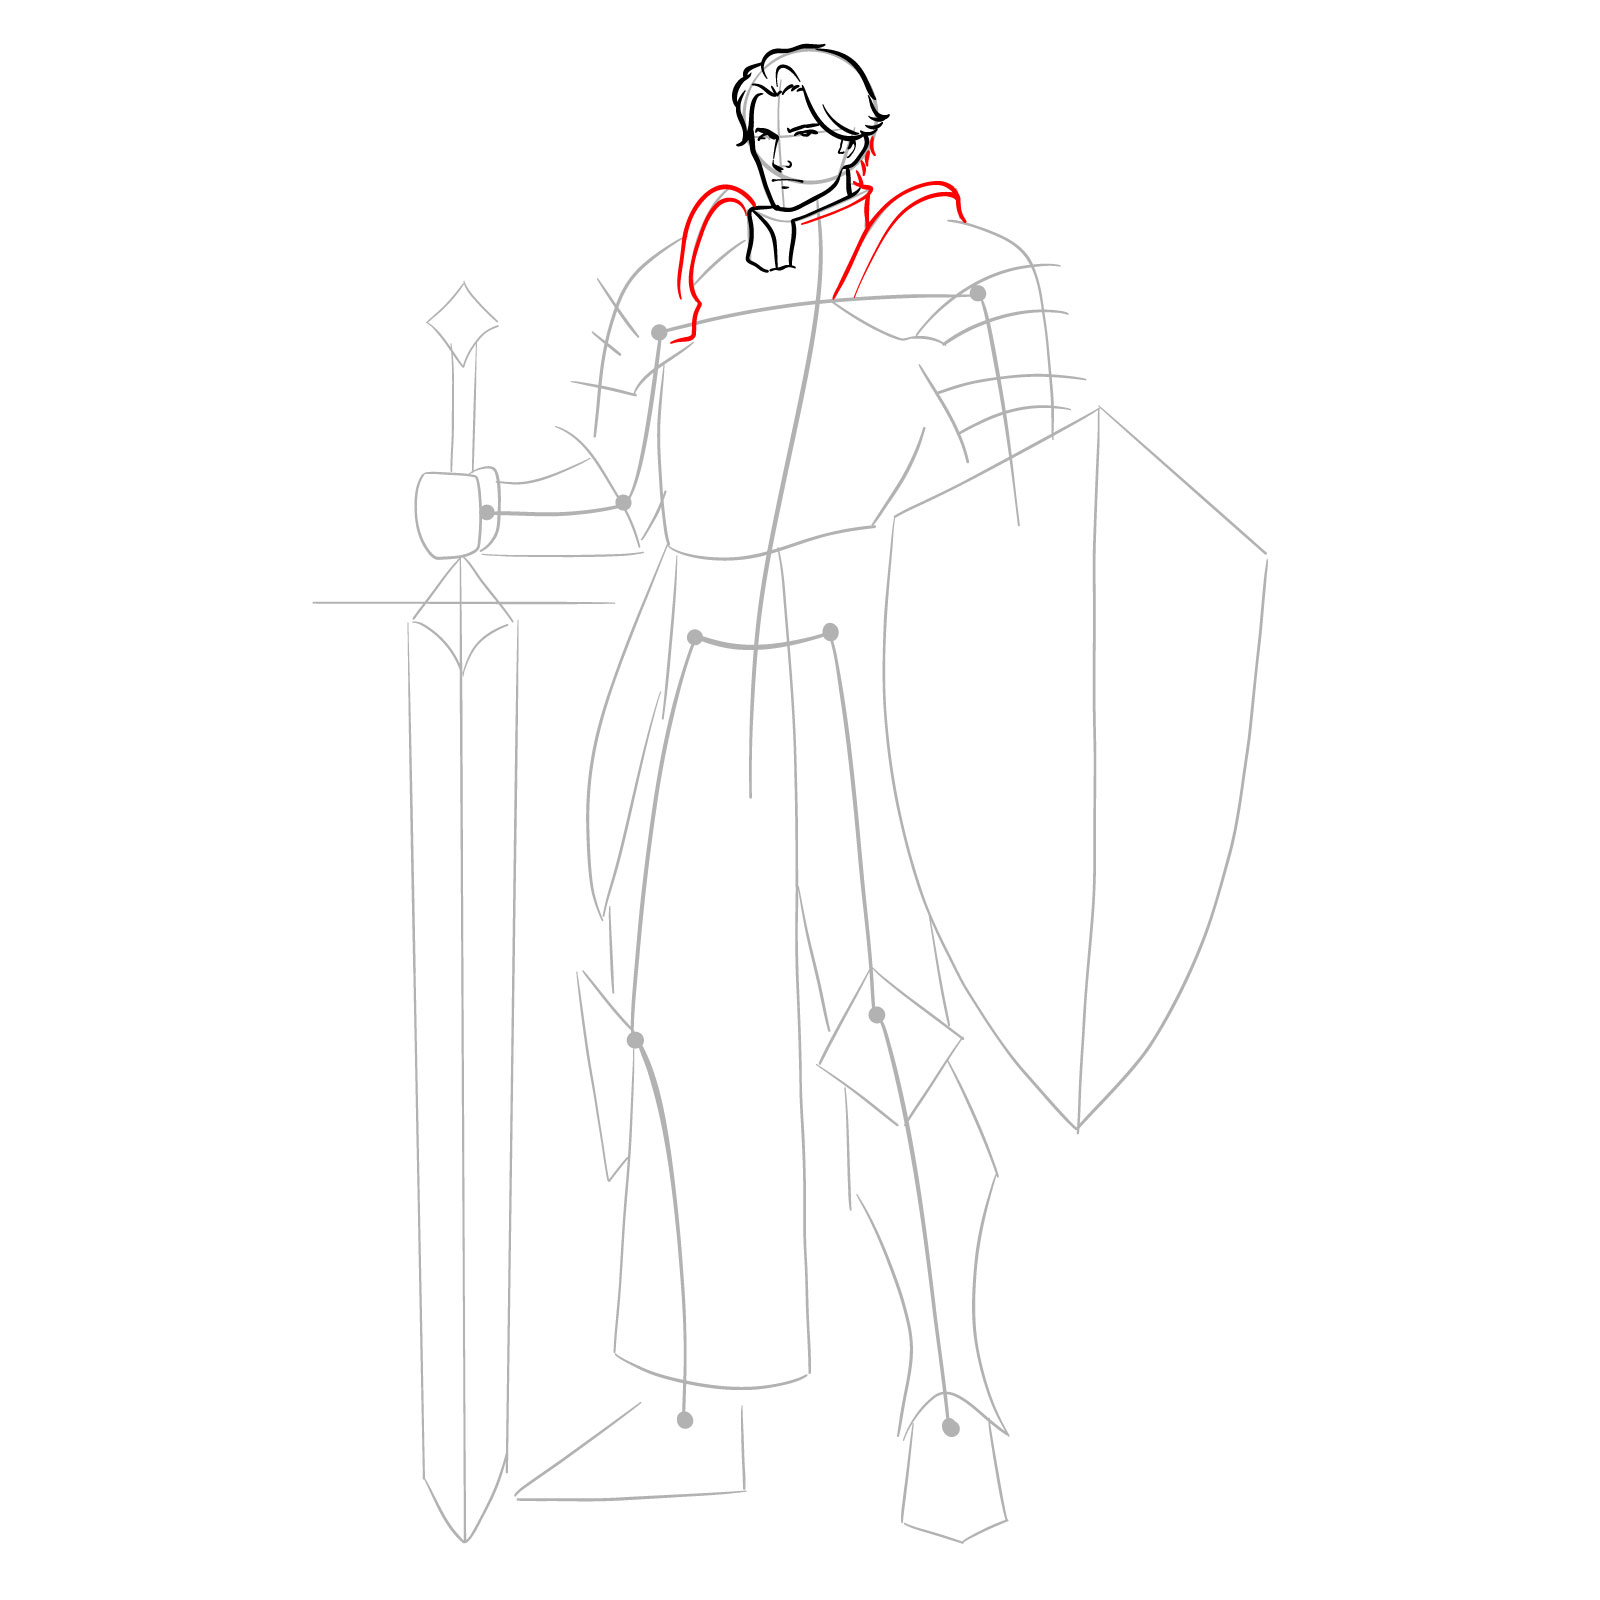 Enhancing the neck armor and beginning shoulder armor in the paladin drawing - step 09